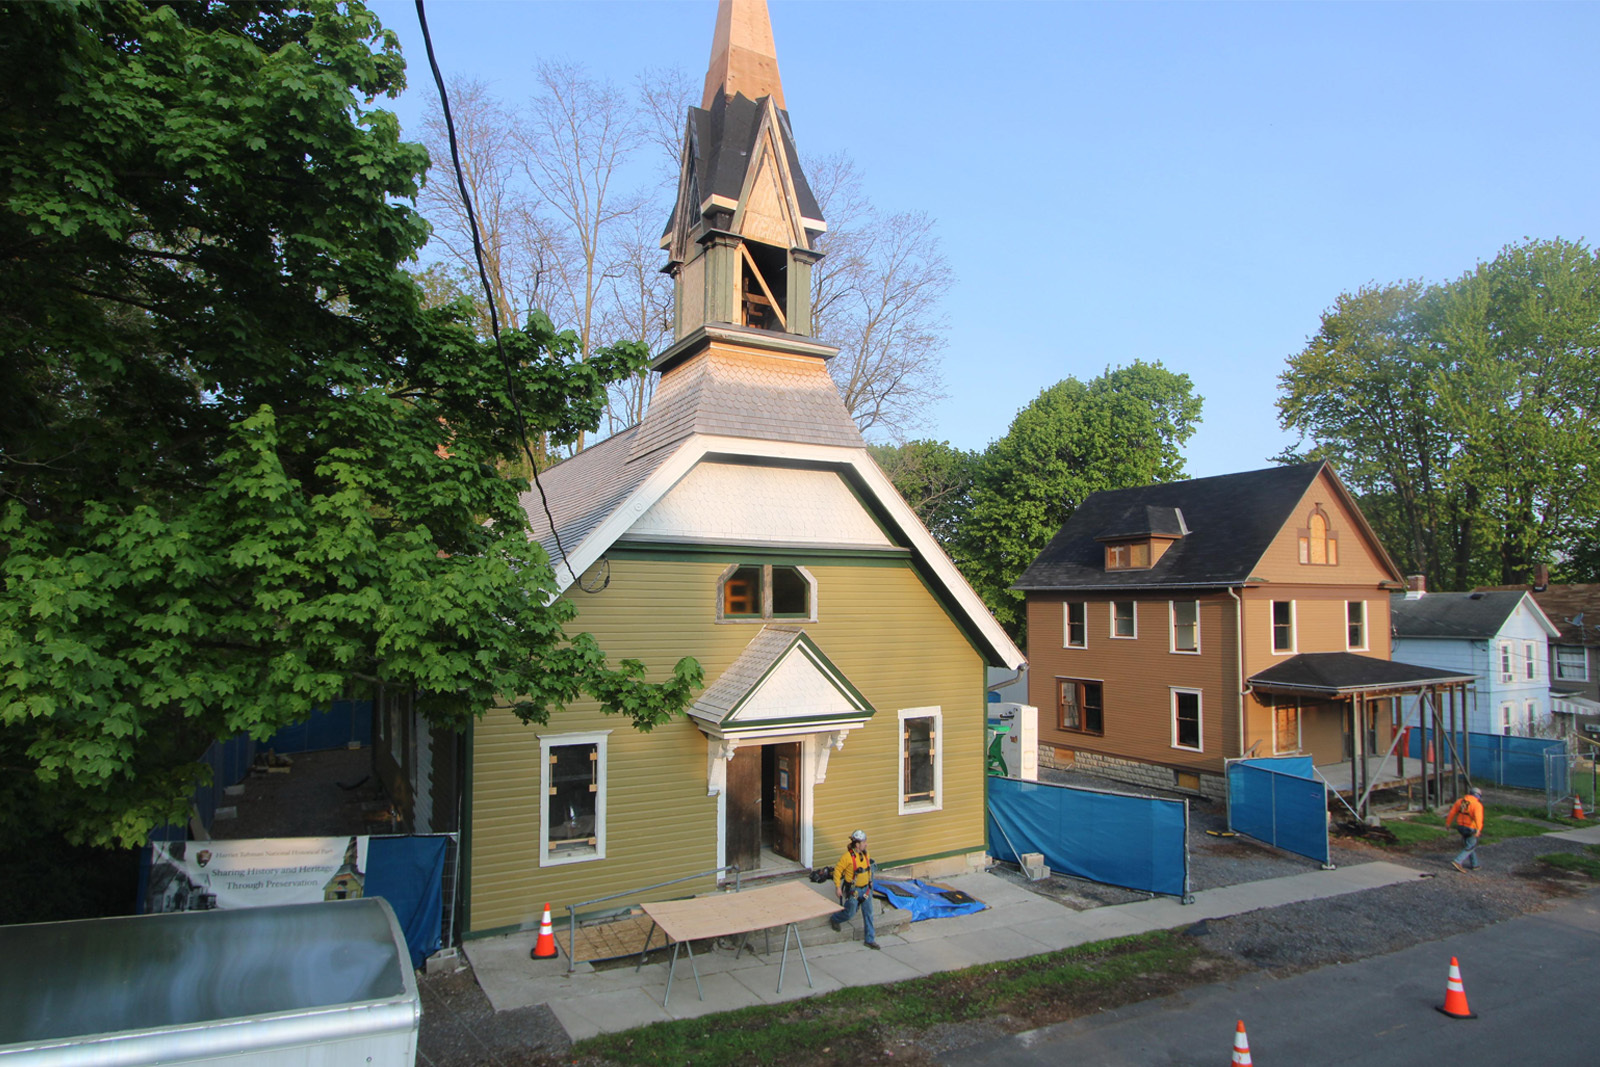 An olive-green church building with a tall unfinished steeple, to the right there is a brown house.